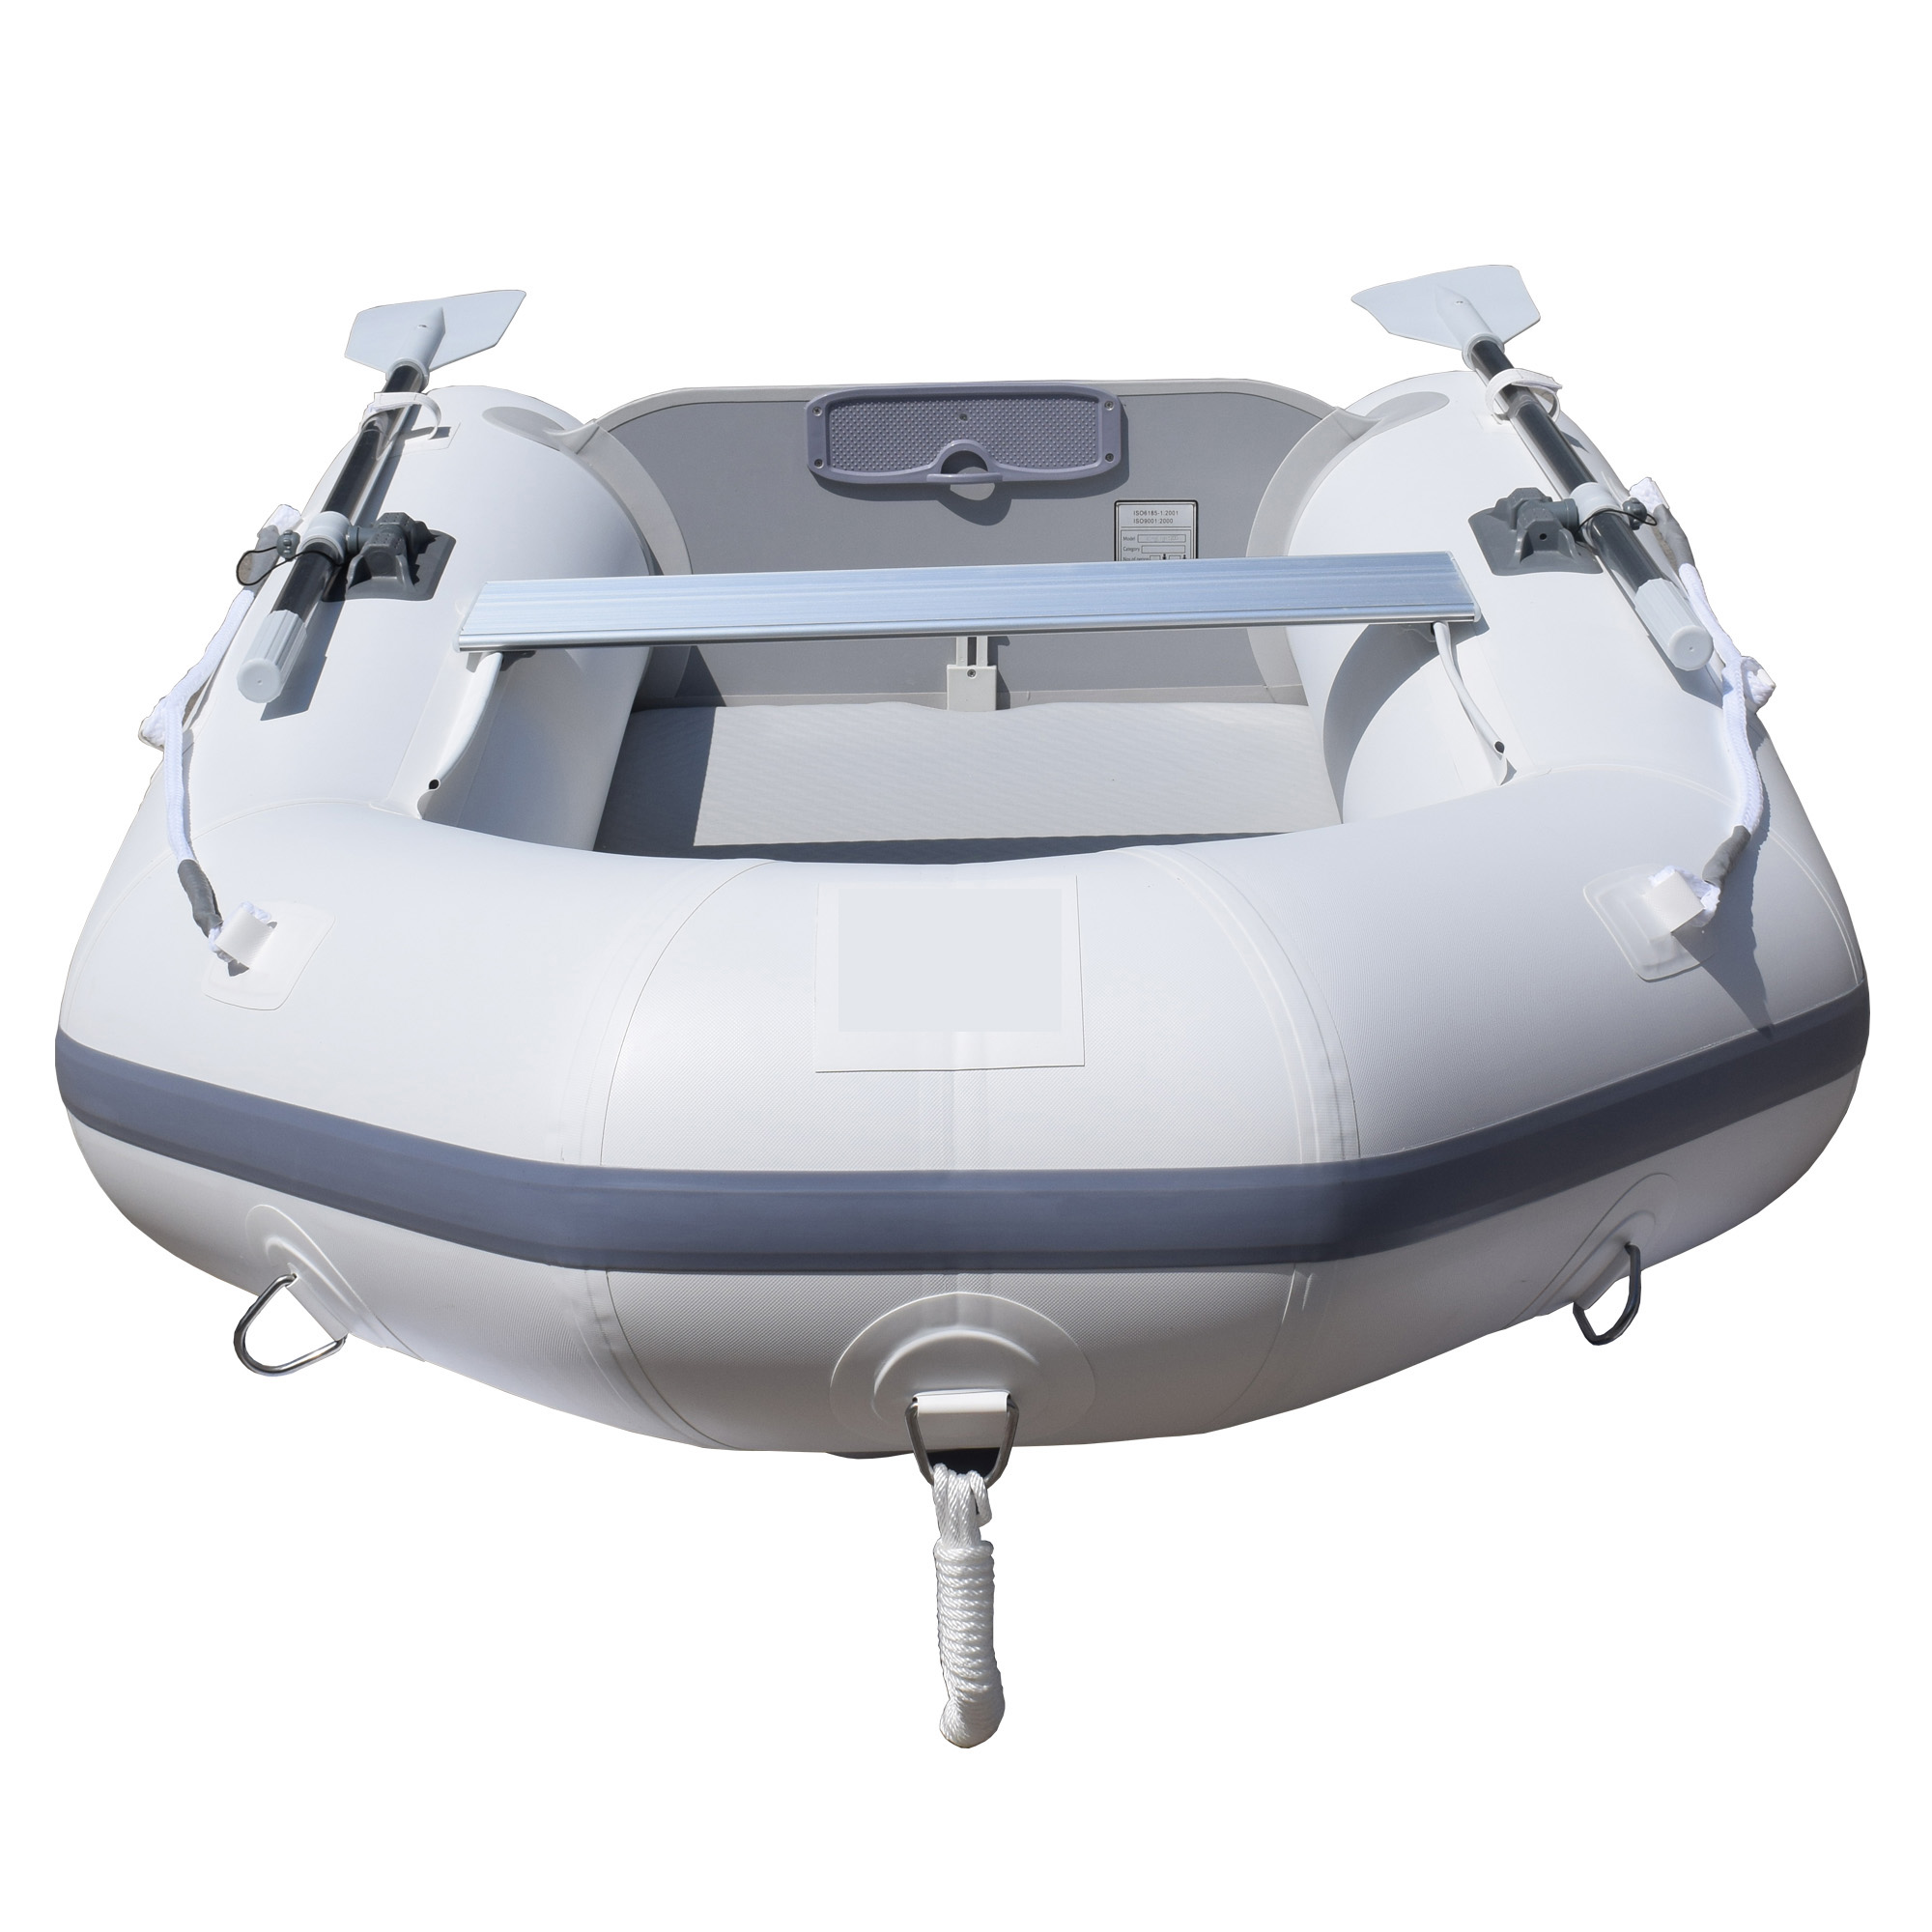 Kinglight - The Ultimate Compact Inflatable Boat for the Adventure Angler